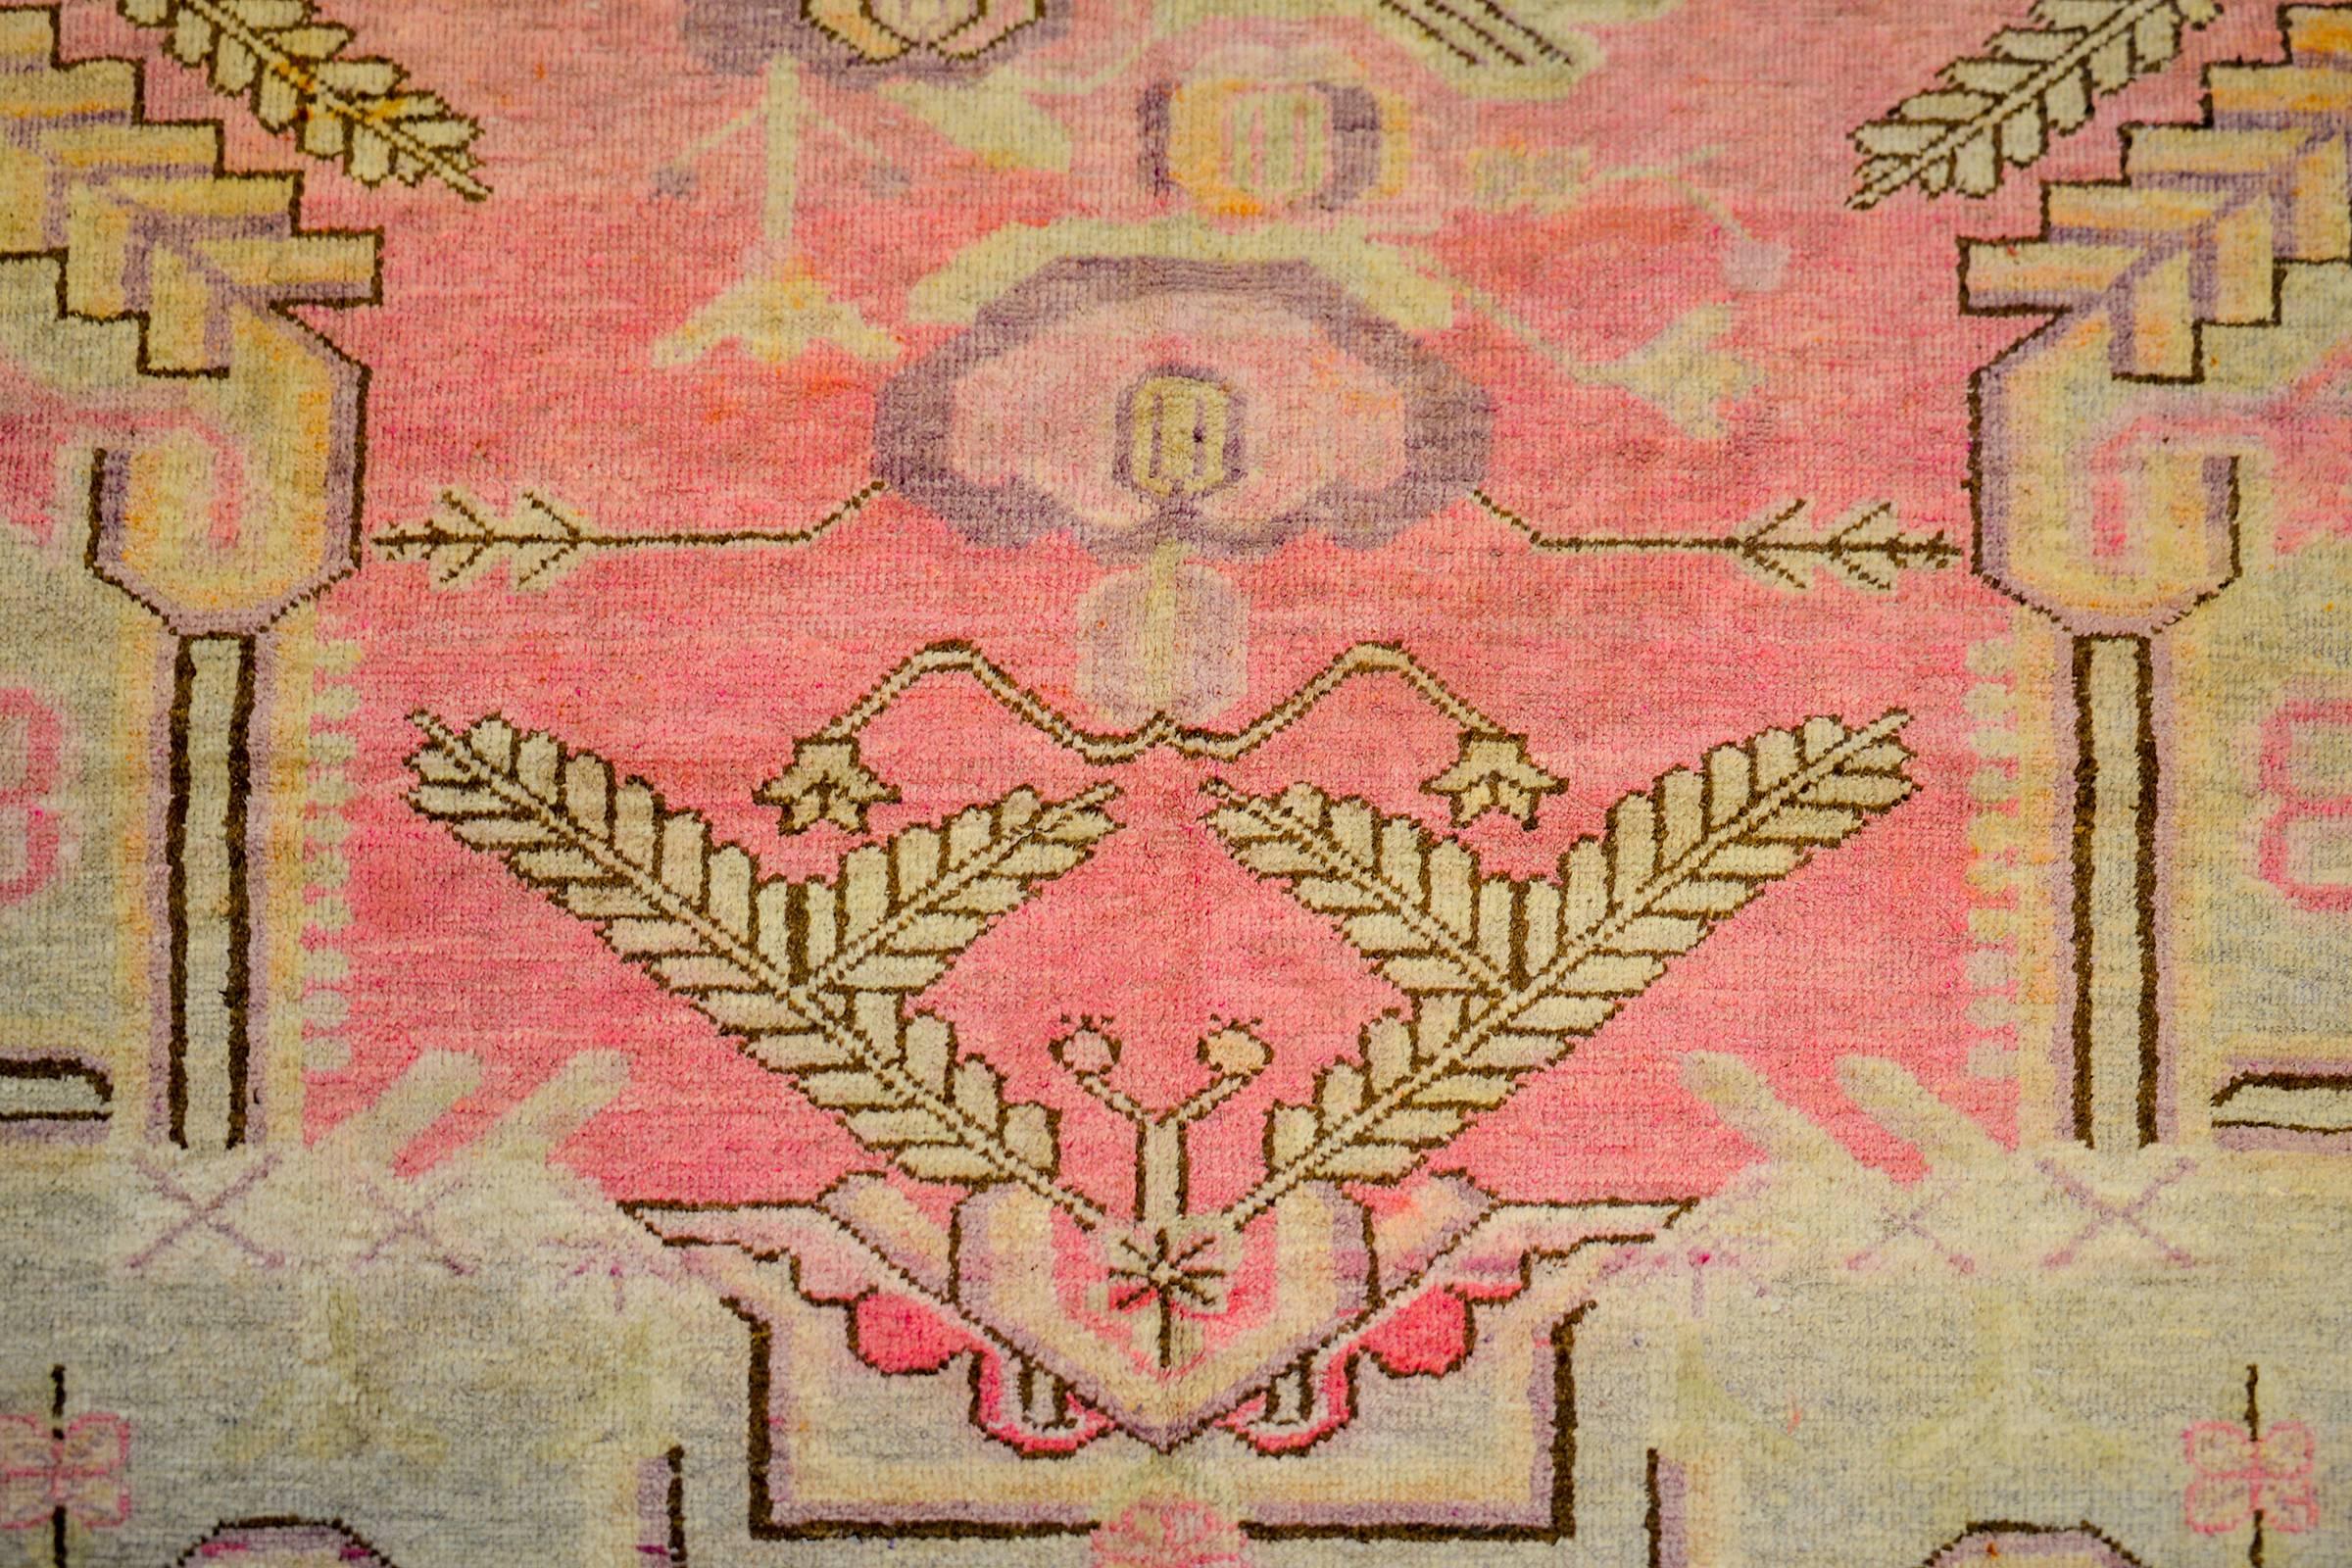 A wonderful early 20th century Central Asian Khotan rug with an incredible asymmetrical large-scale floral medallion woven in crimson, violet, black, and cream colored wool. The medallion lives amidst a pink field with flowering branches surrounded